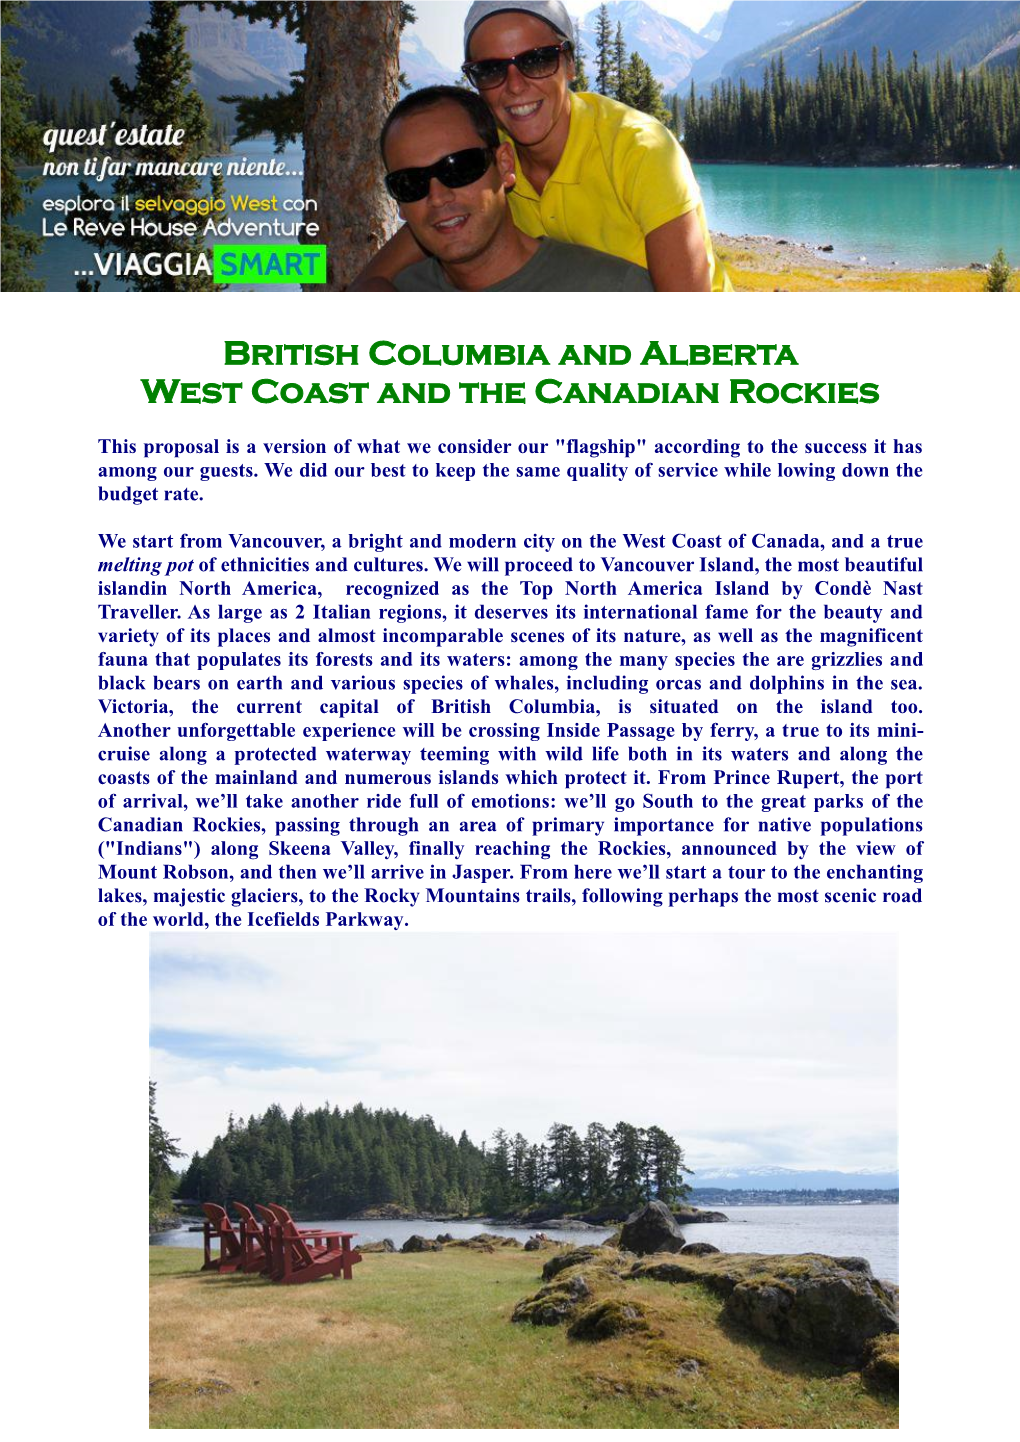 British Columbia and Alberta West Coast and the Canadian Rockies